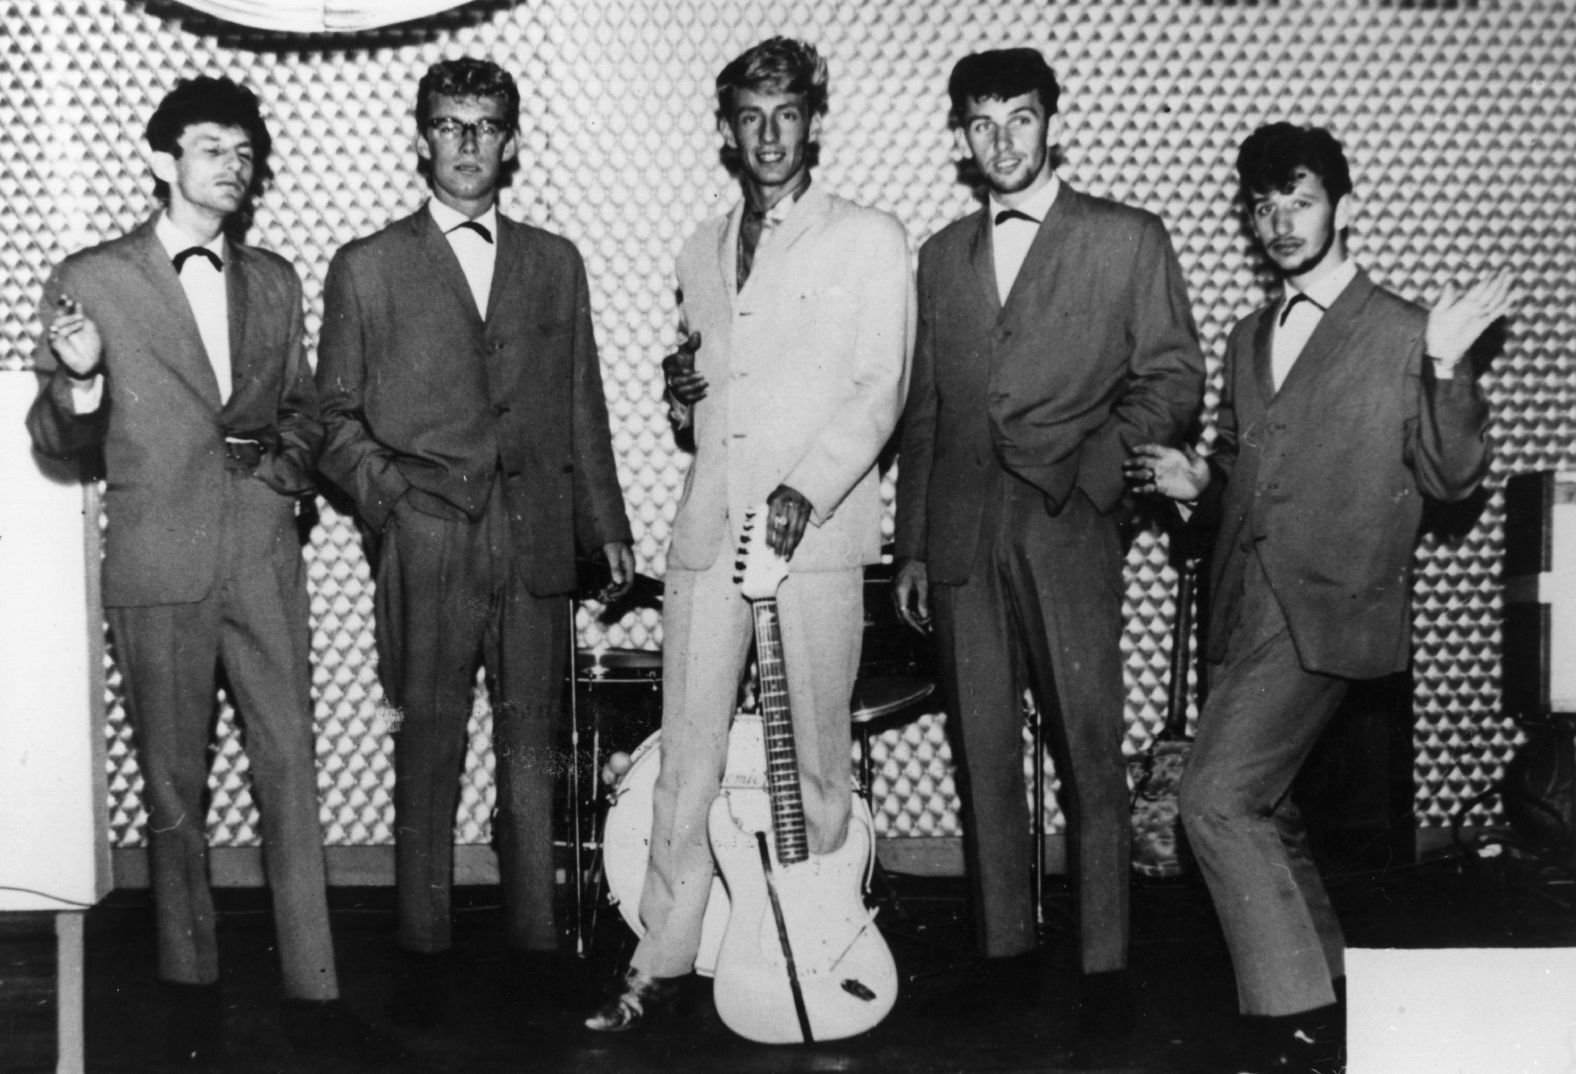 Starr, right, was the drummer for the group Rory Storm and the Hurricanes from 1957-1962.